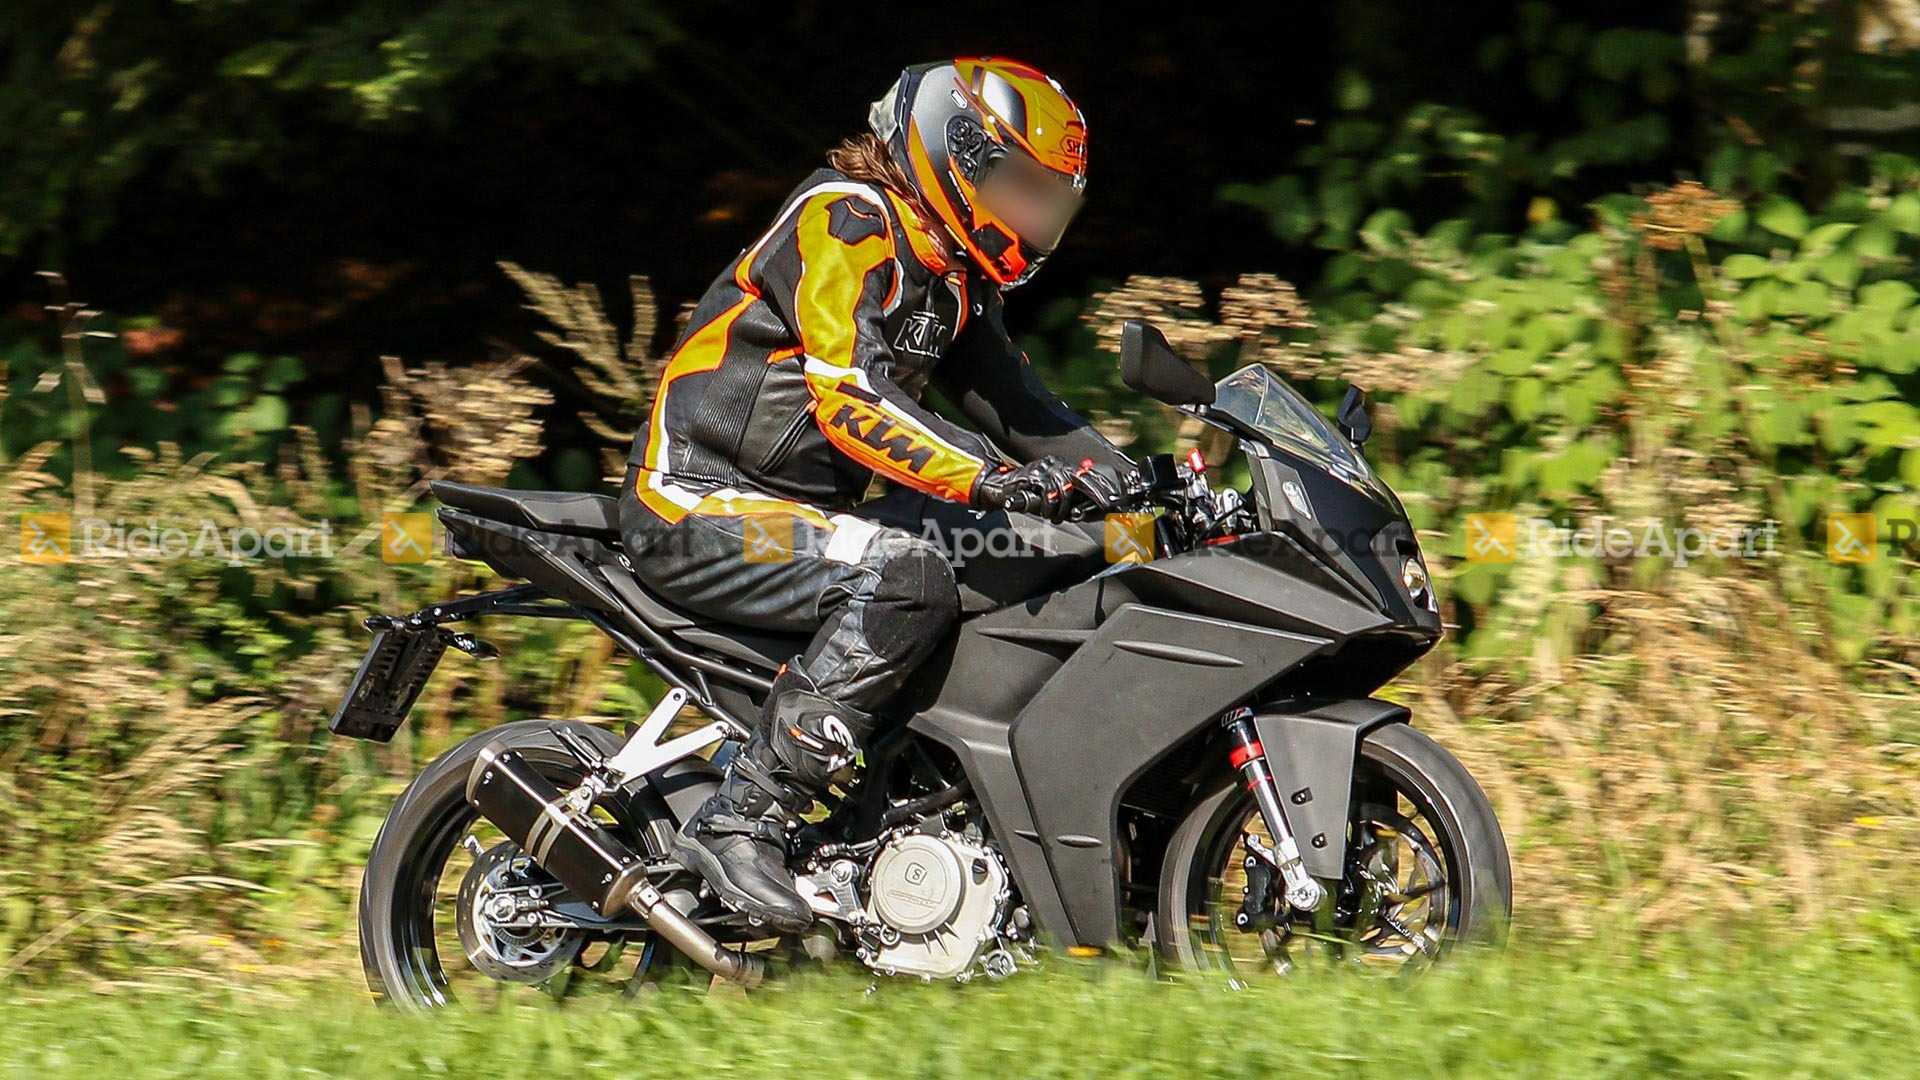 Production-Ready 2020 KTM RC 390 Surfaces Online - foreground